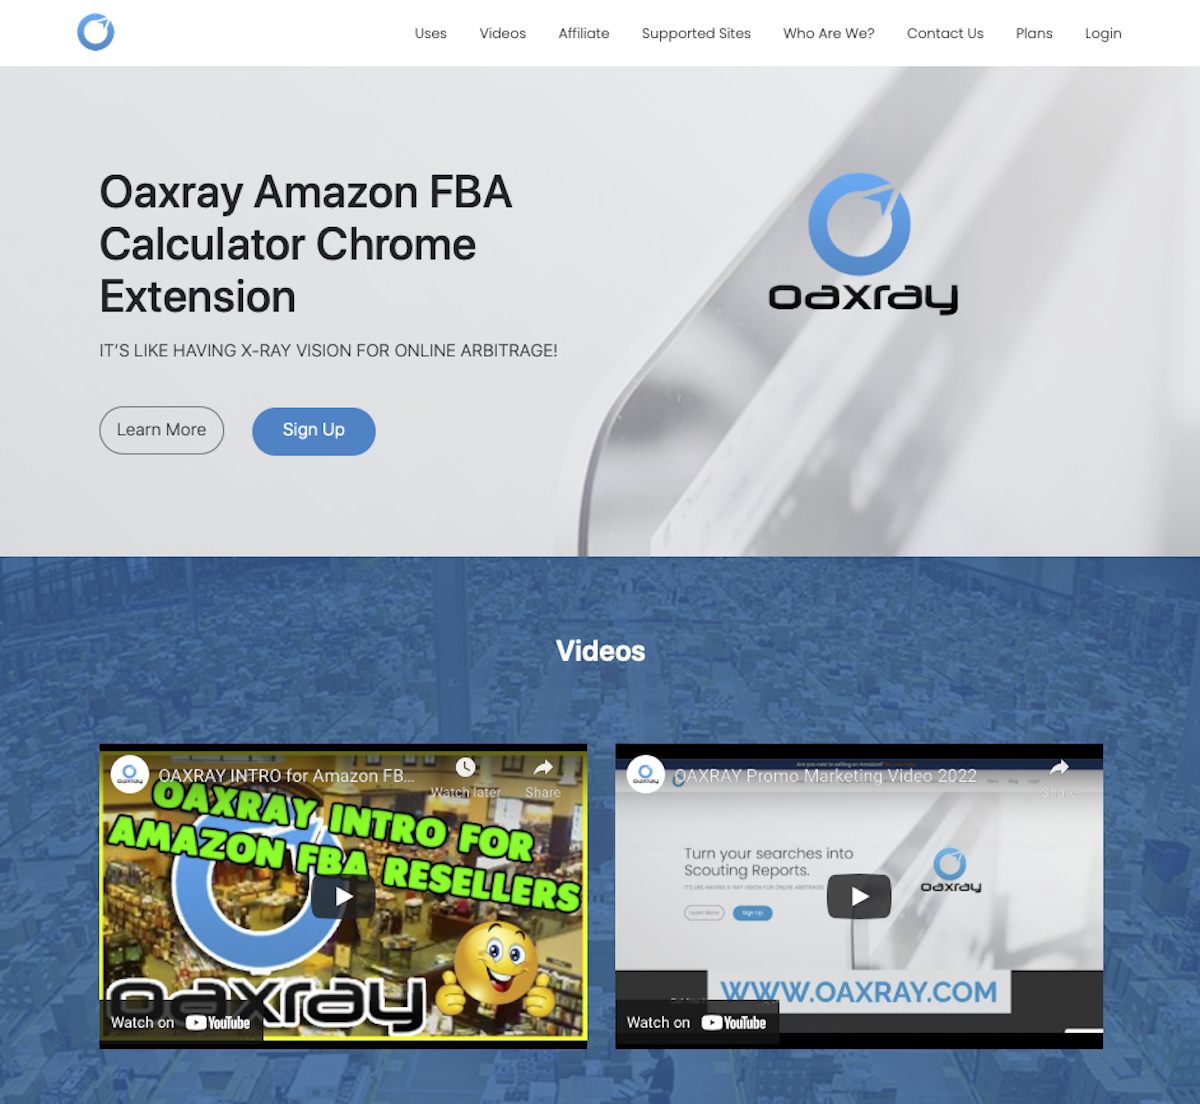 Oaxray landing page showing info about chrome extension